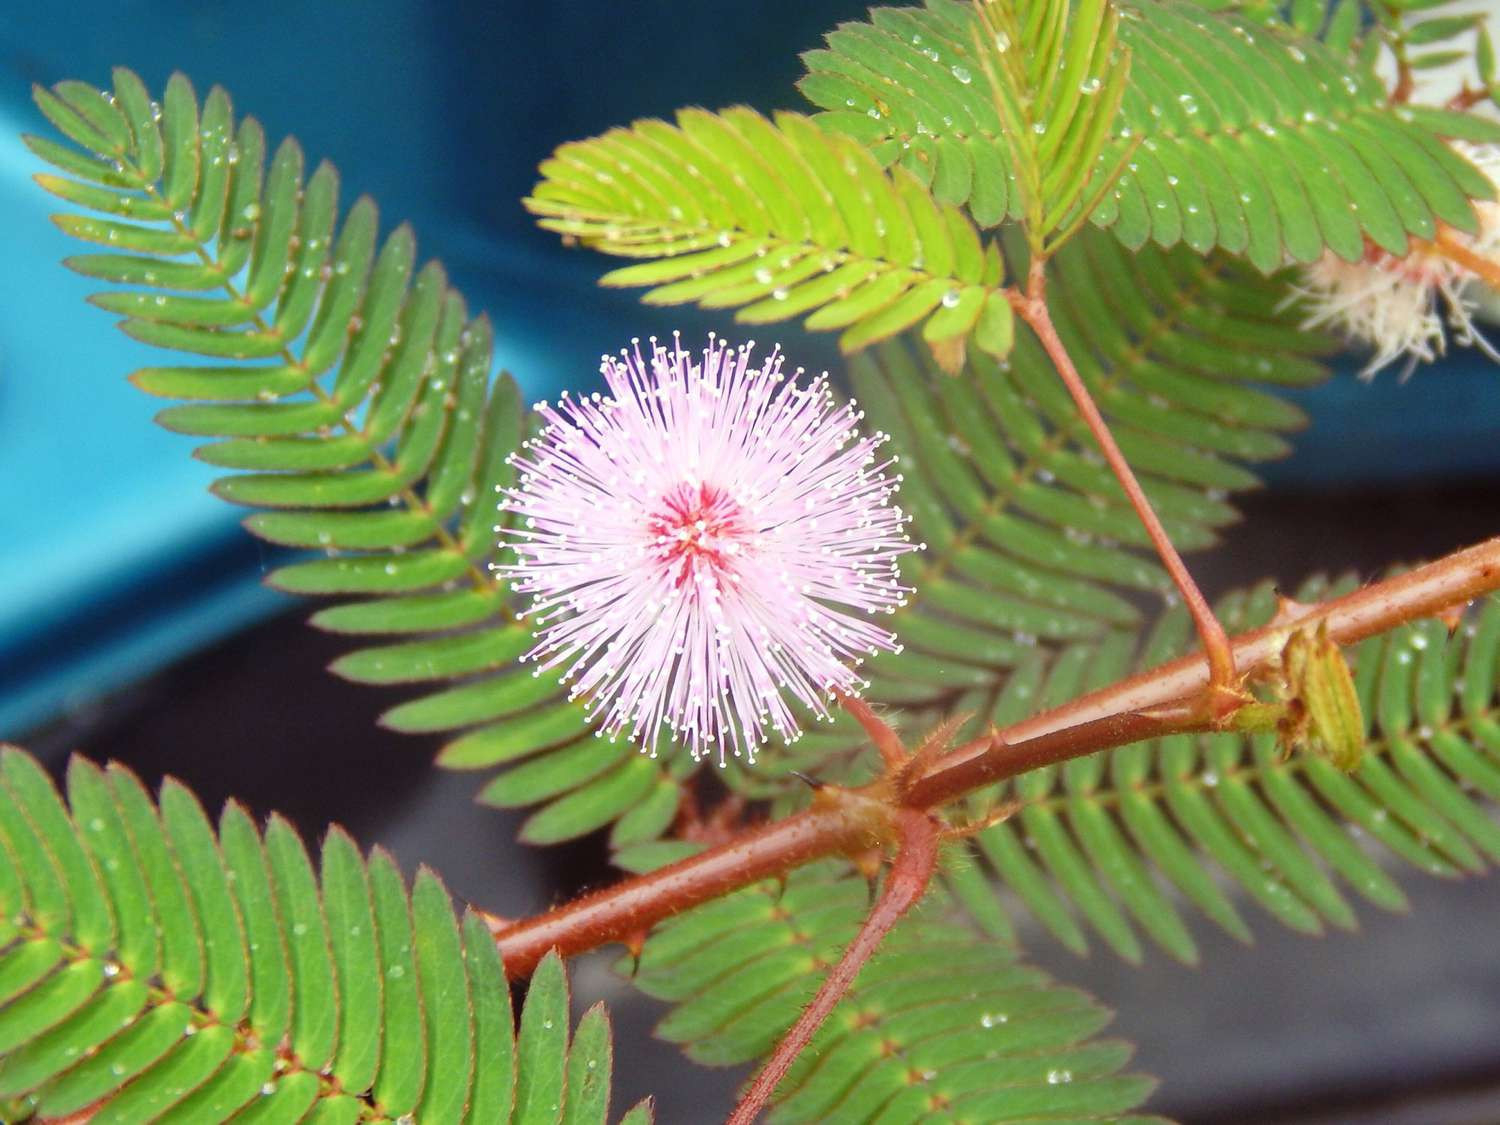 How To Care For The Sensitive Plant So It Thrives